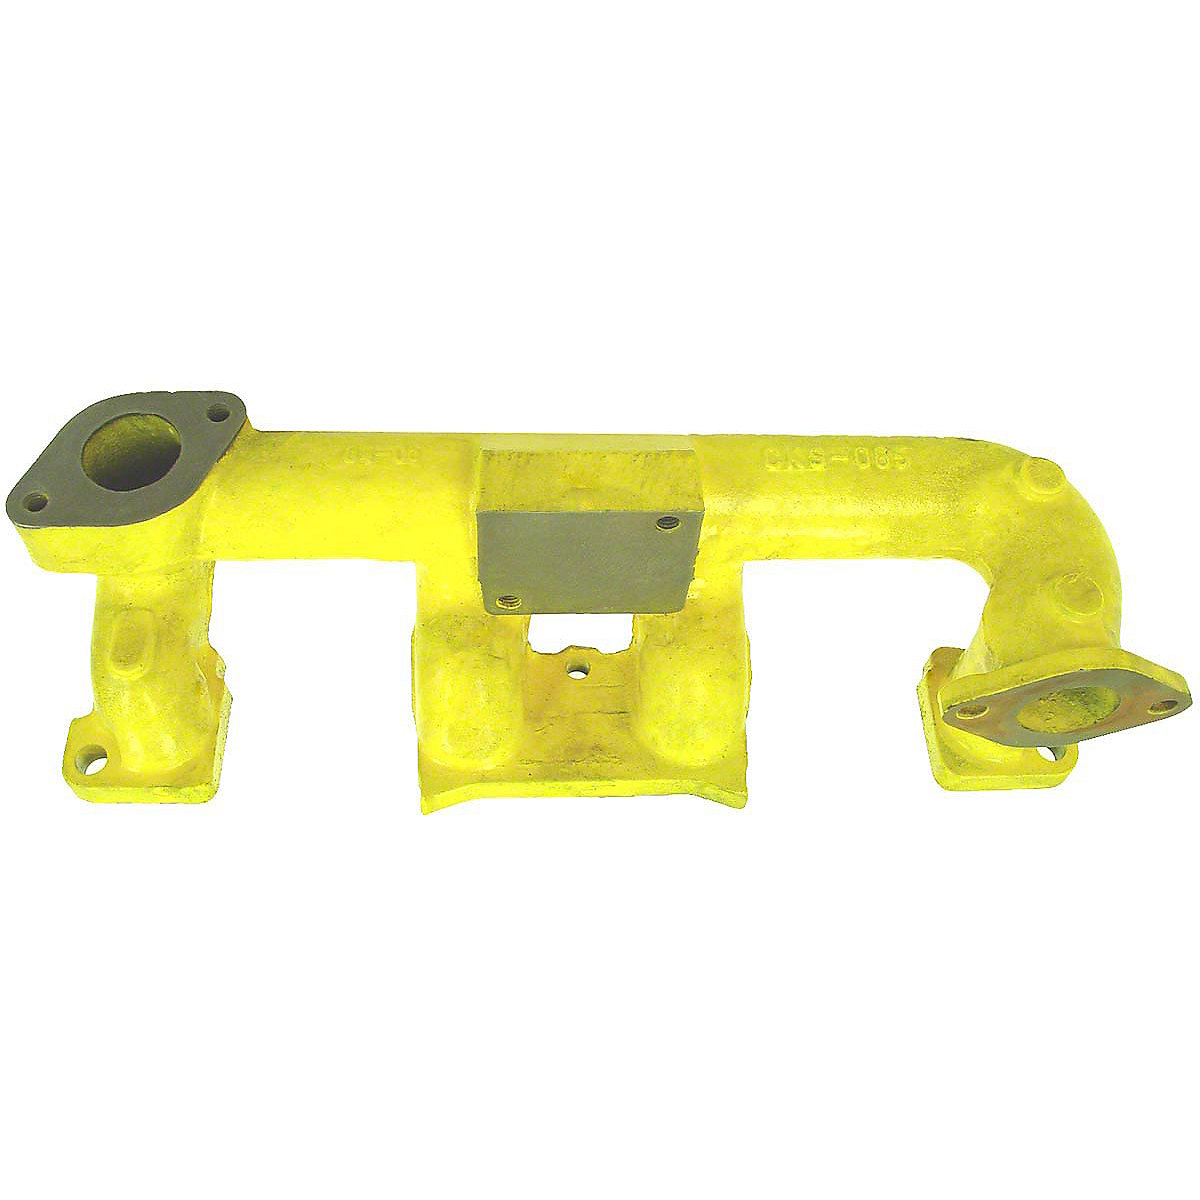 UCA30312            Exhaust Manifold---Replaces G1064, G2009